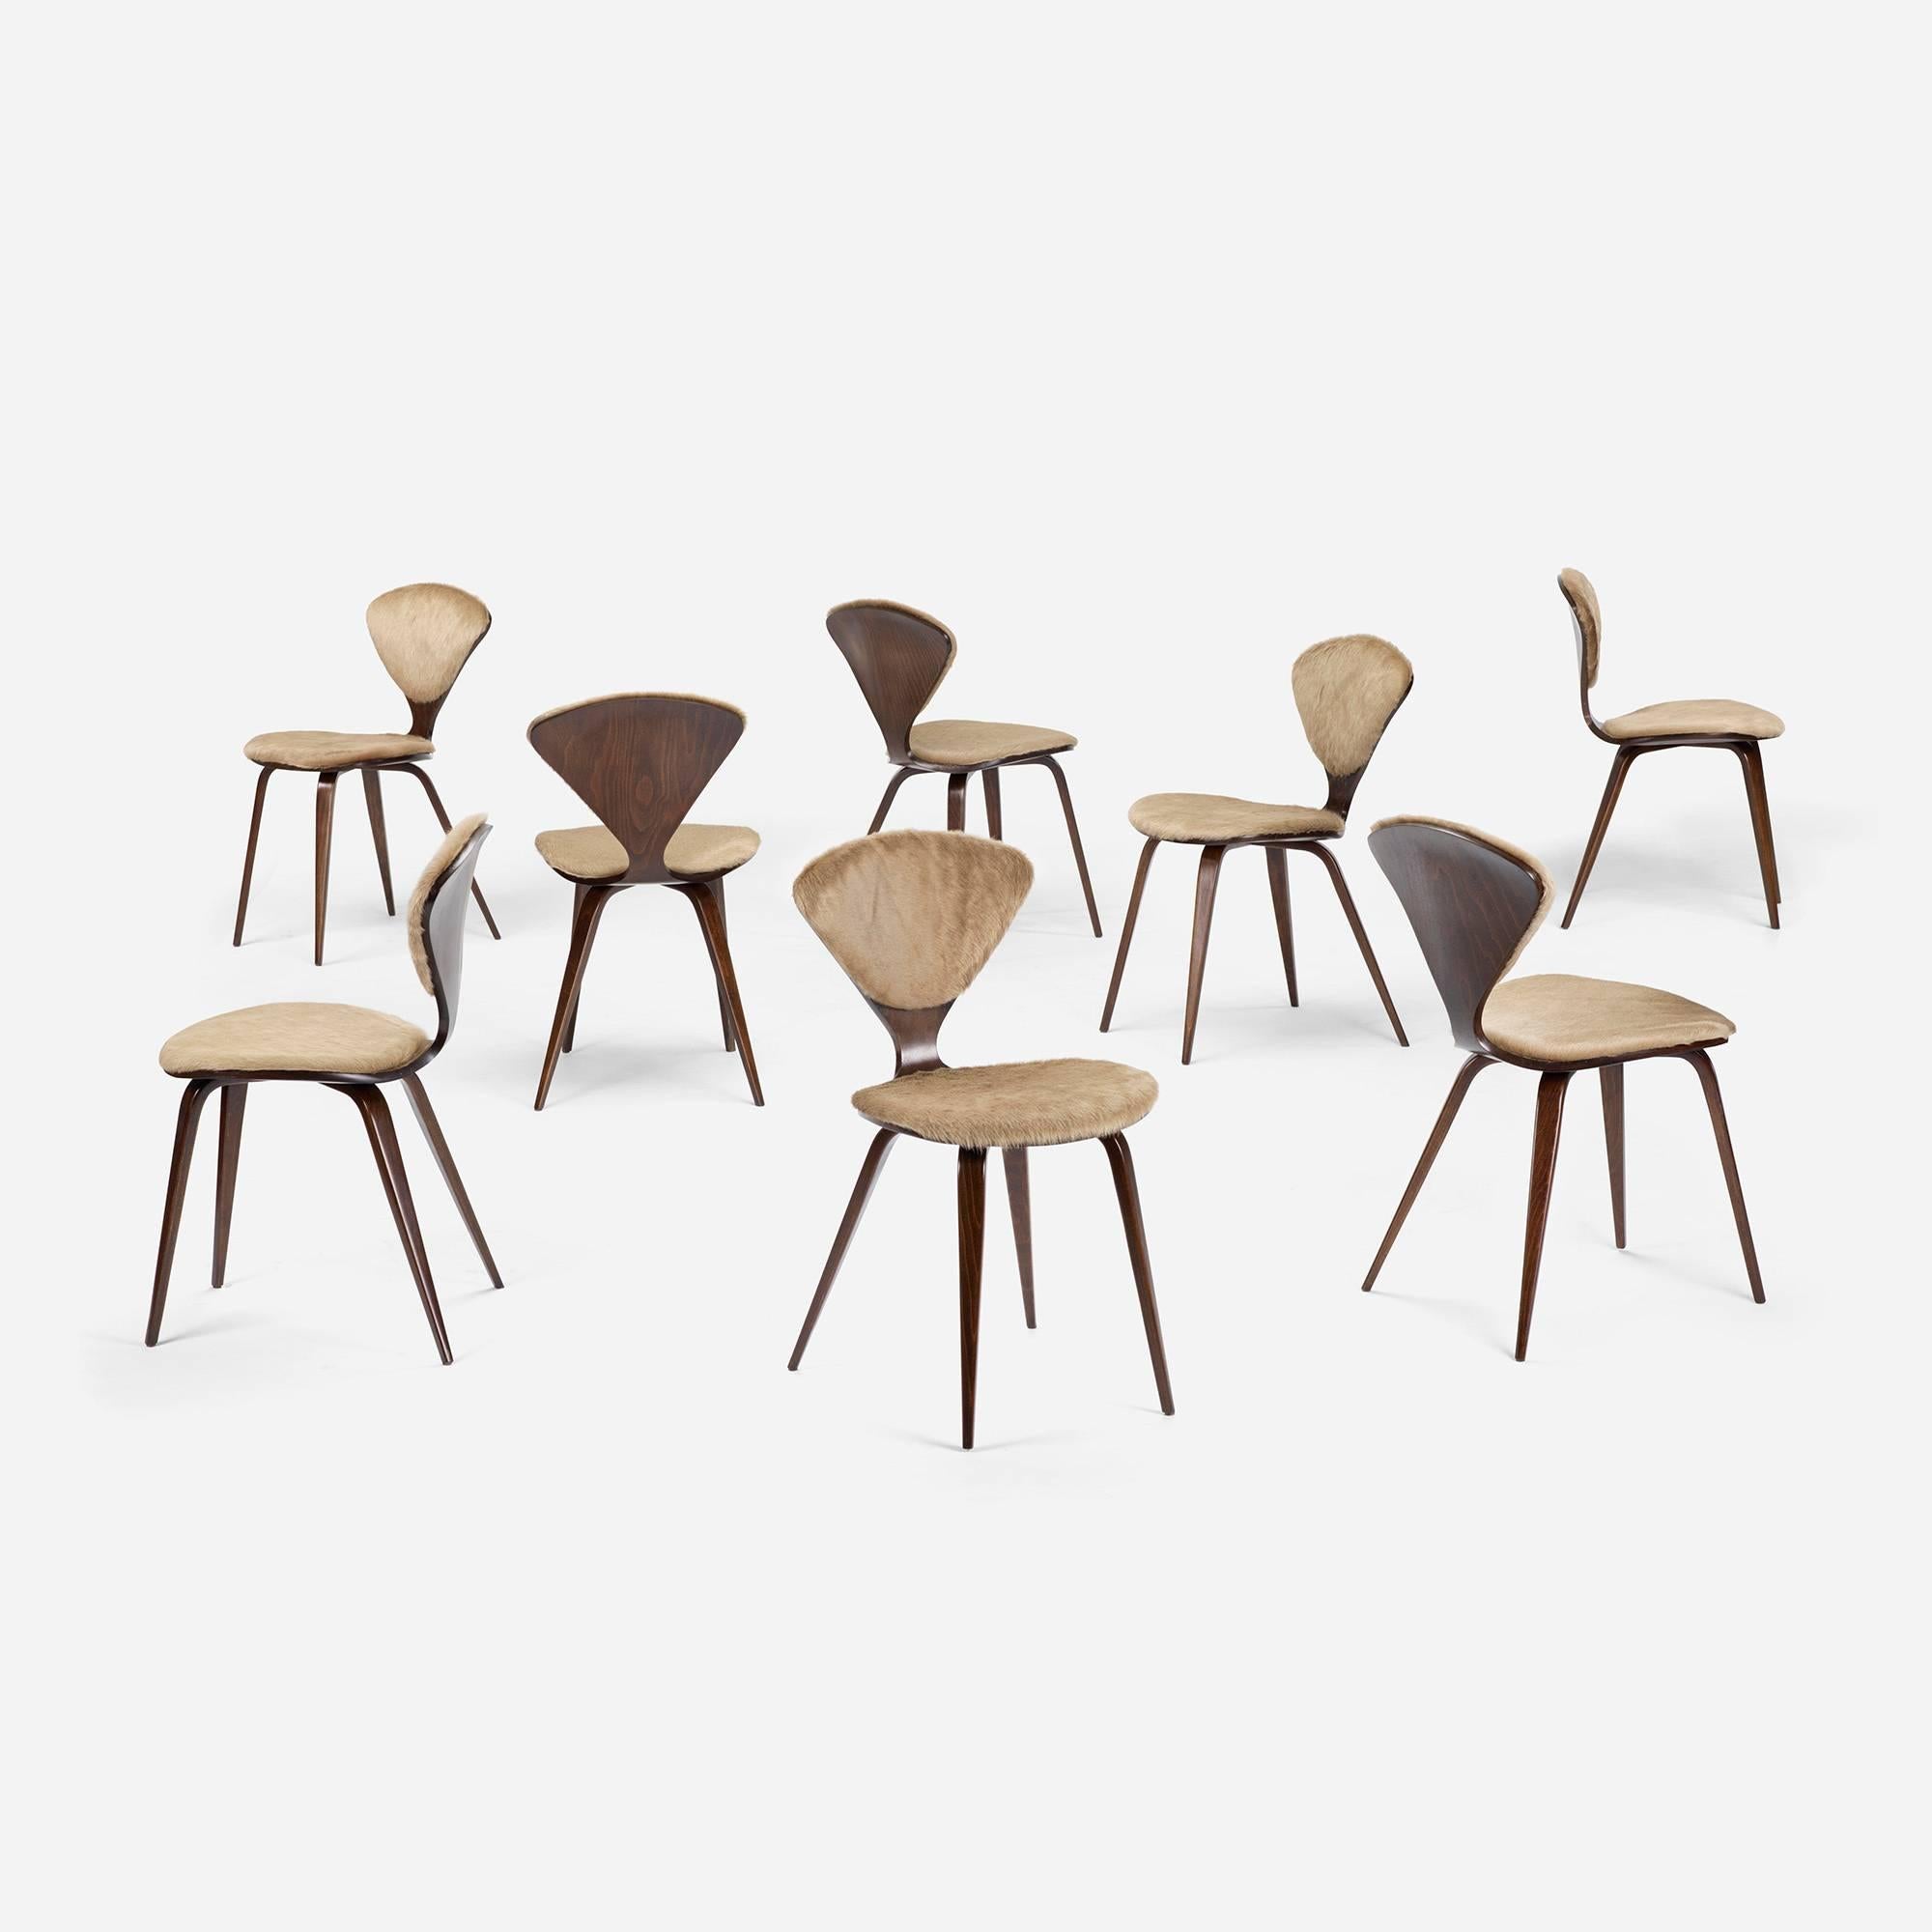 Dining chairs, set eight by Plycraft. Norman cherner design executed by Lou App.